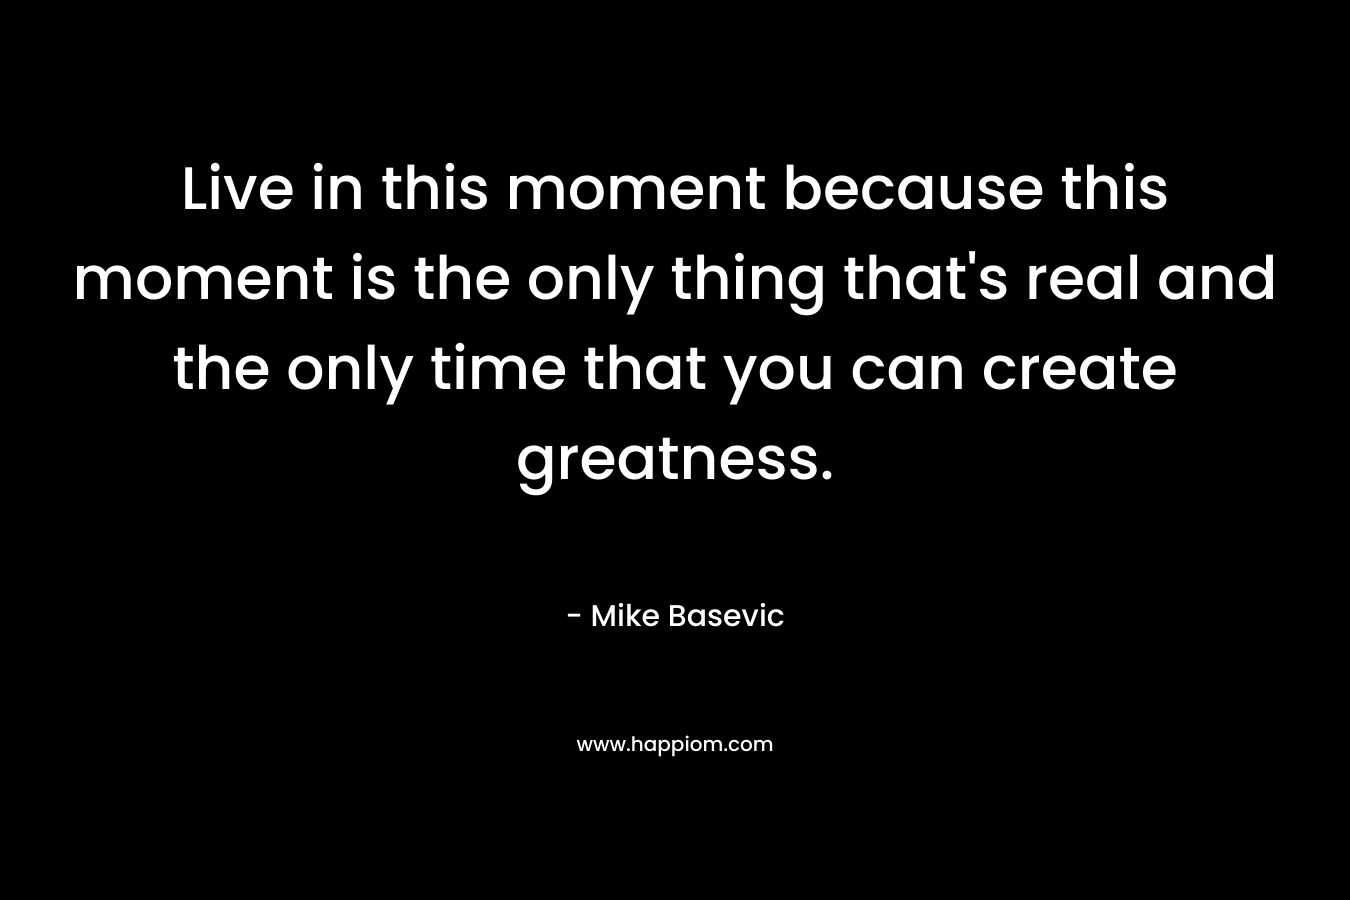 Live in this moment because this moment is the only thing that’s real and the only time that you can create greatness. – Mike Basevic